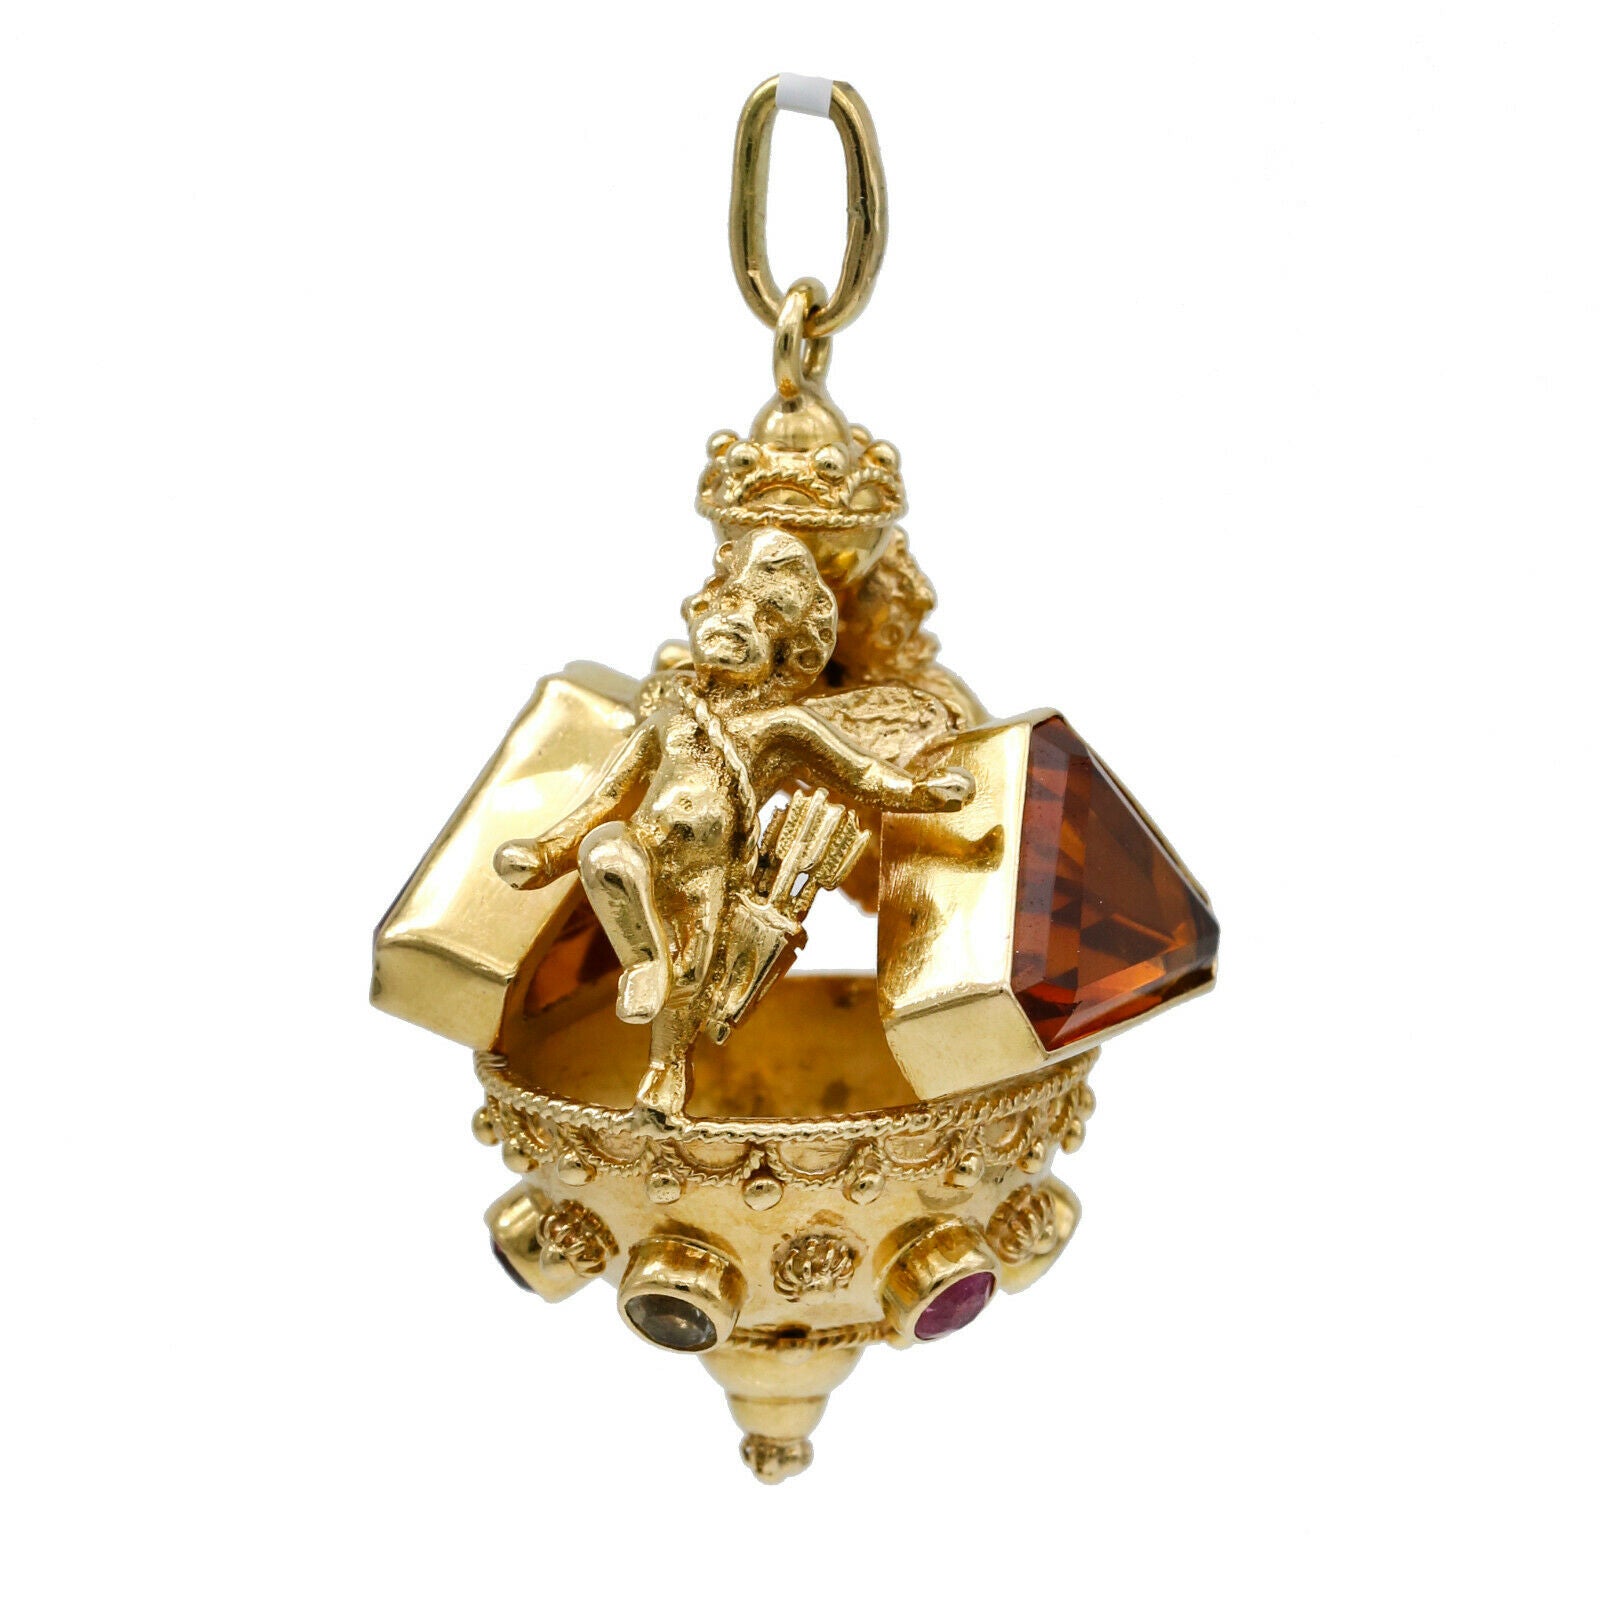 Cupid Etruscan Charm Pendant with Gemstones in 18k Yellow Gold